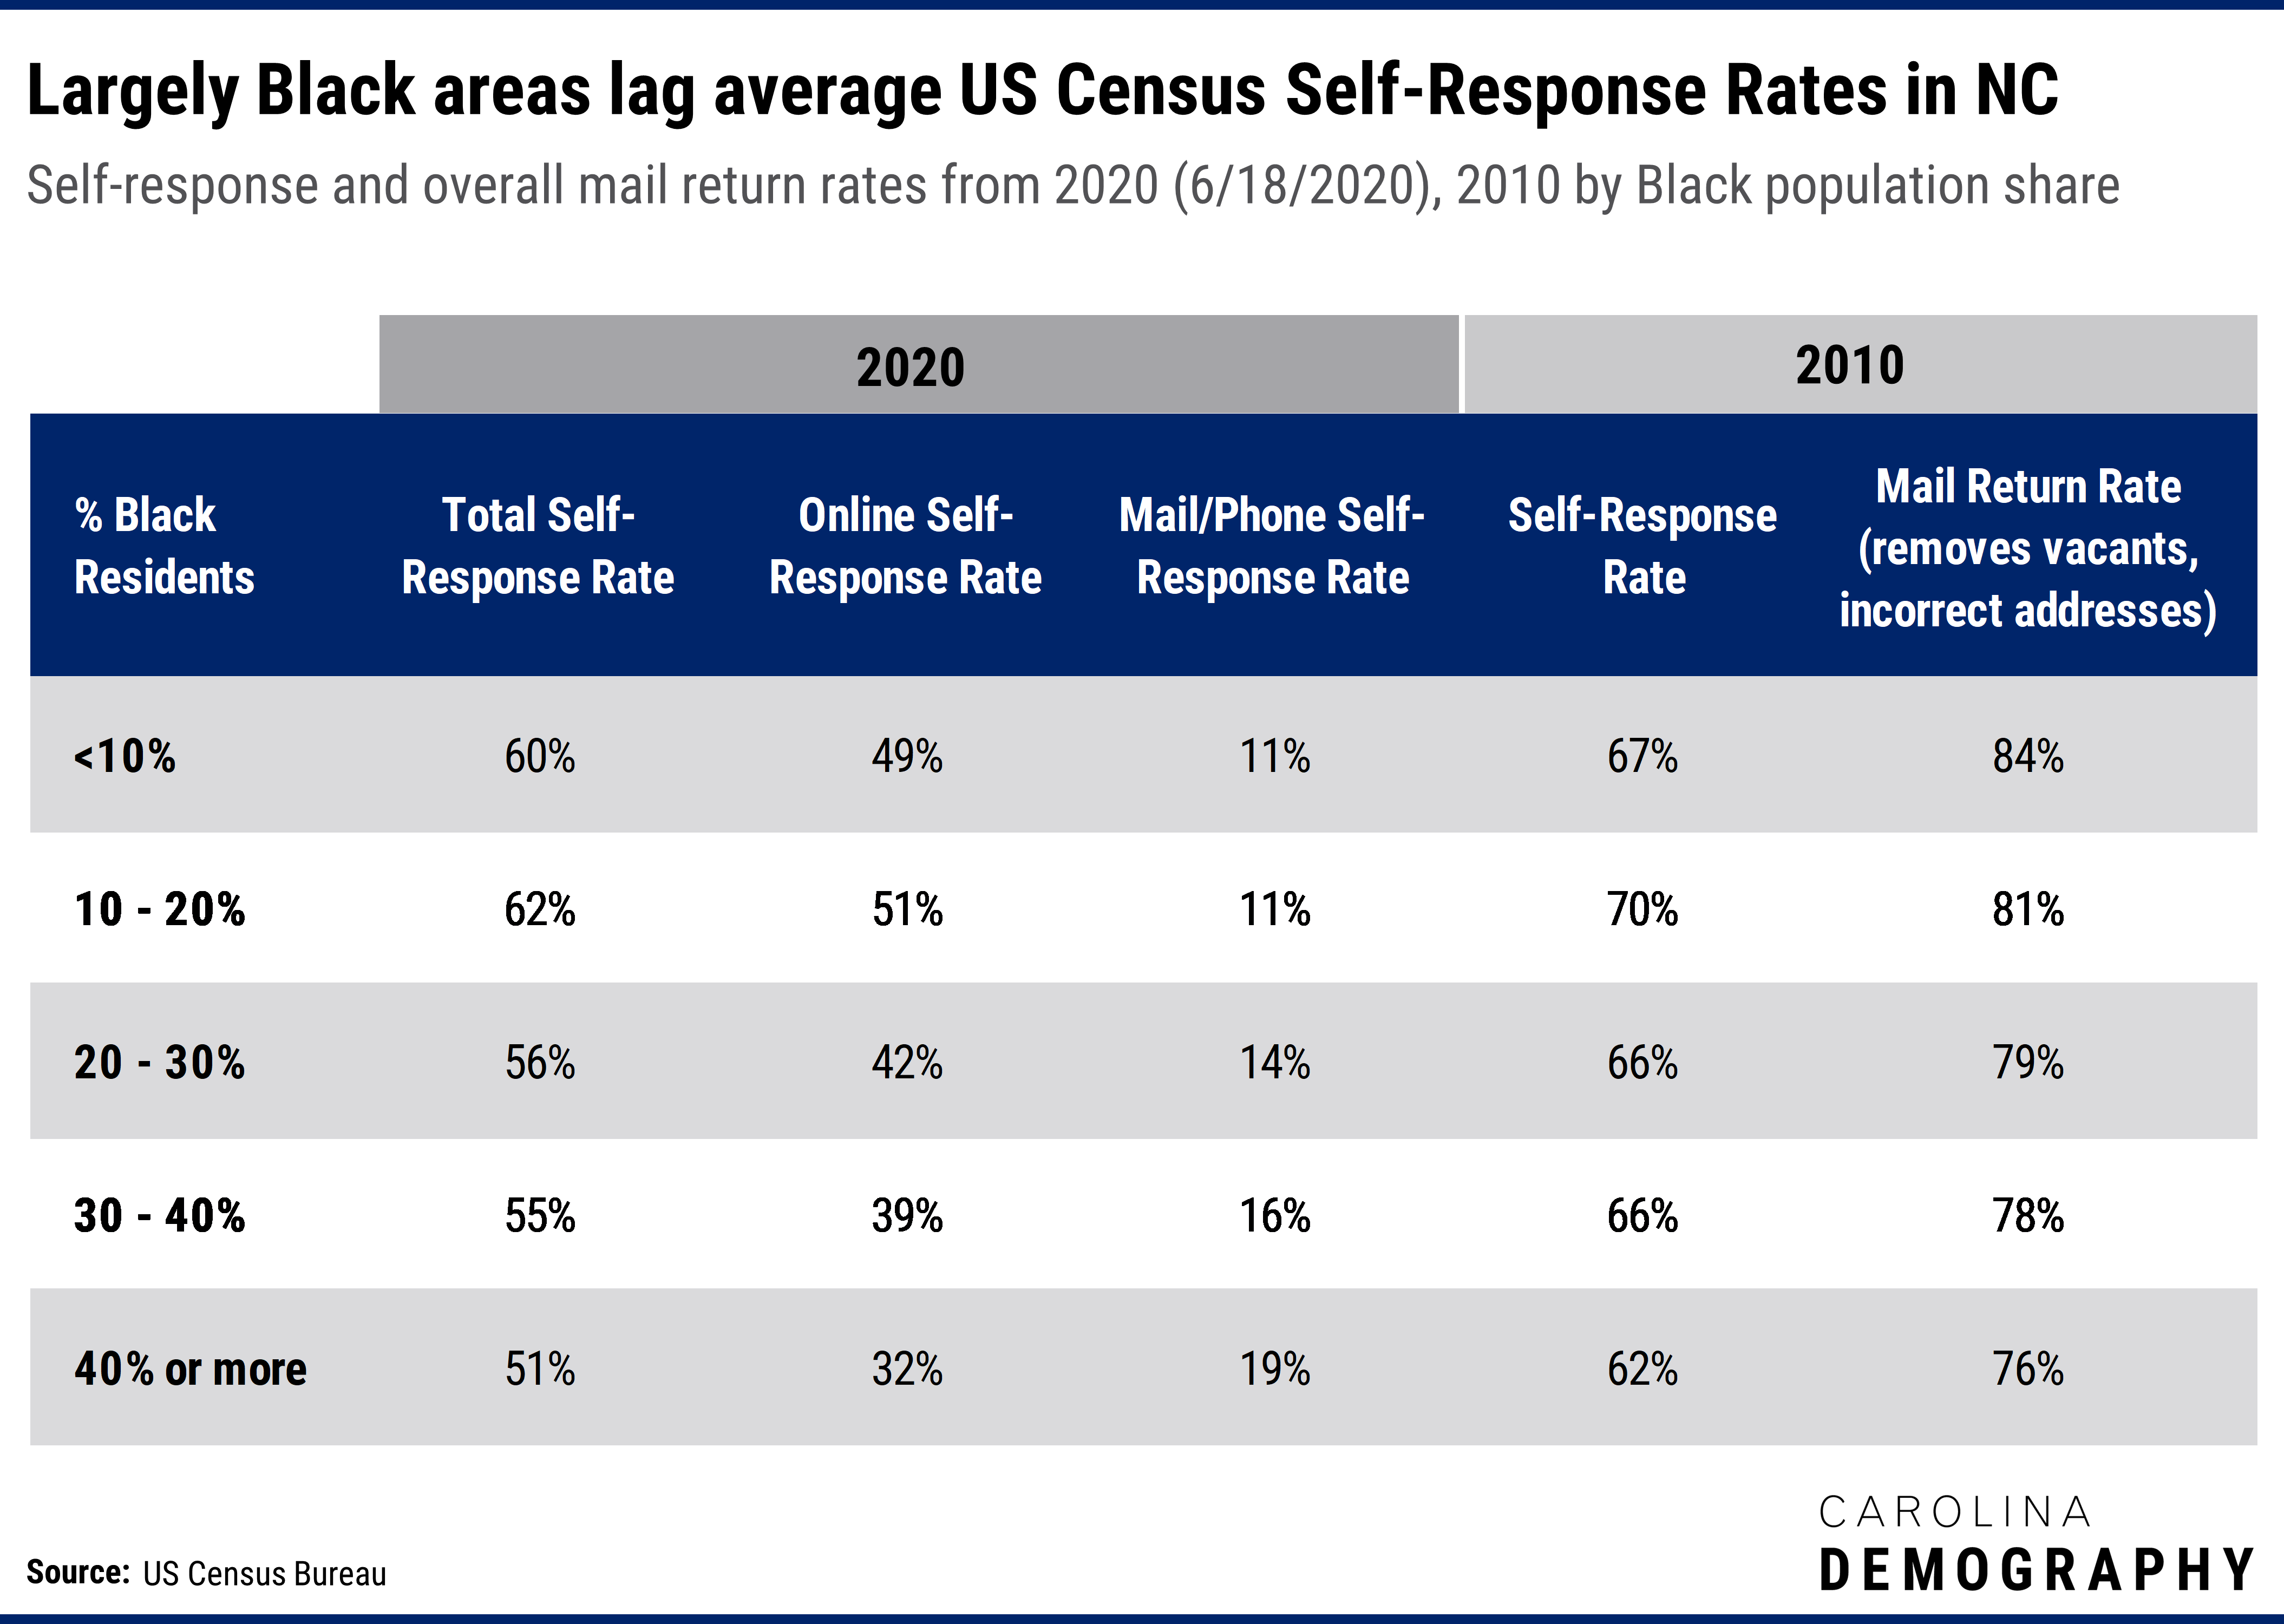 Largely Black areas lag average US Census Self-Response Rates in NC. Self-response and overall mail return rates from 2020 (6/18/2020), versus 2010 rates by Black population share.